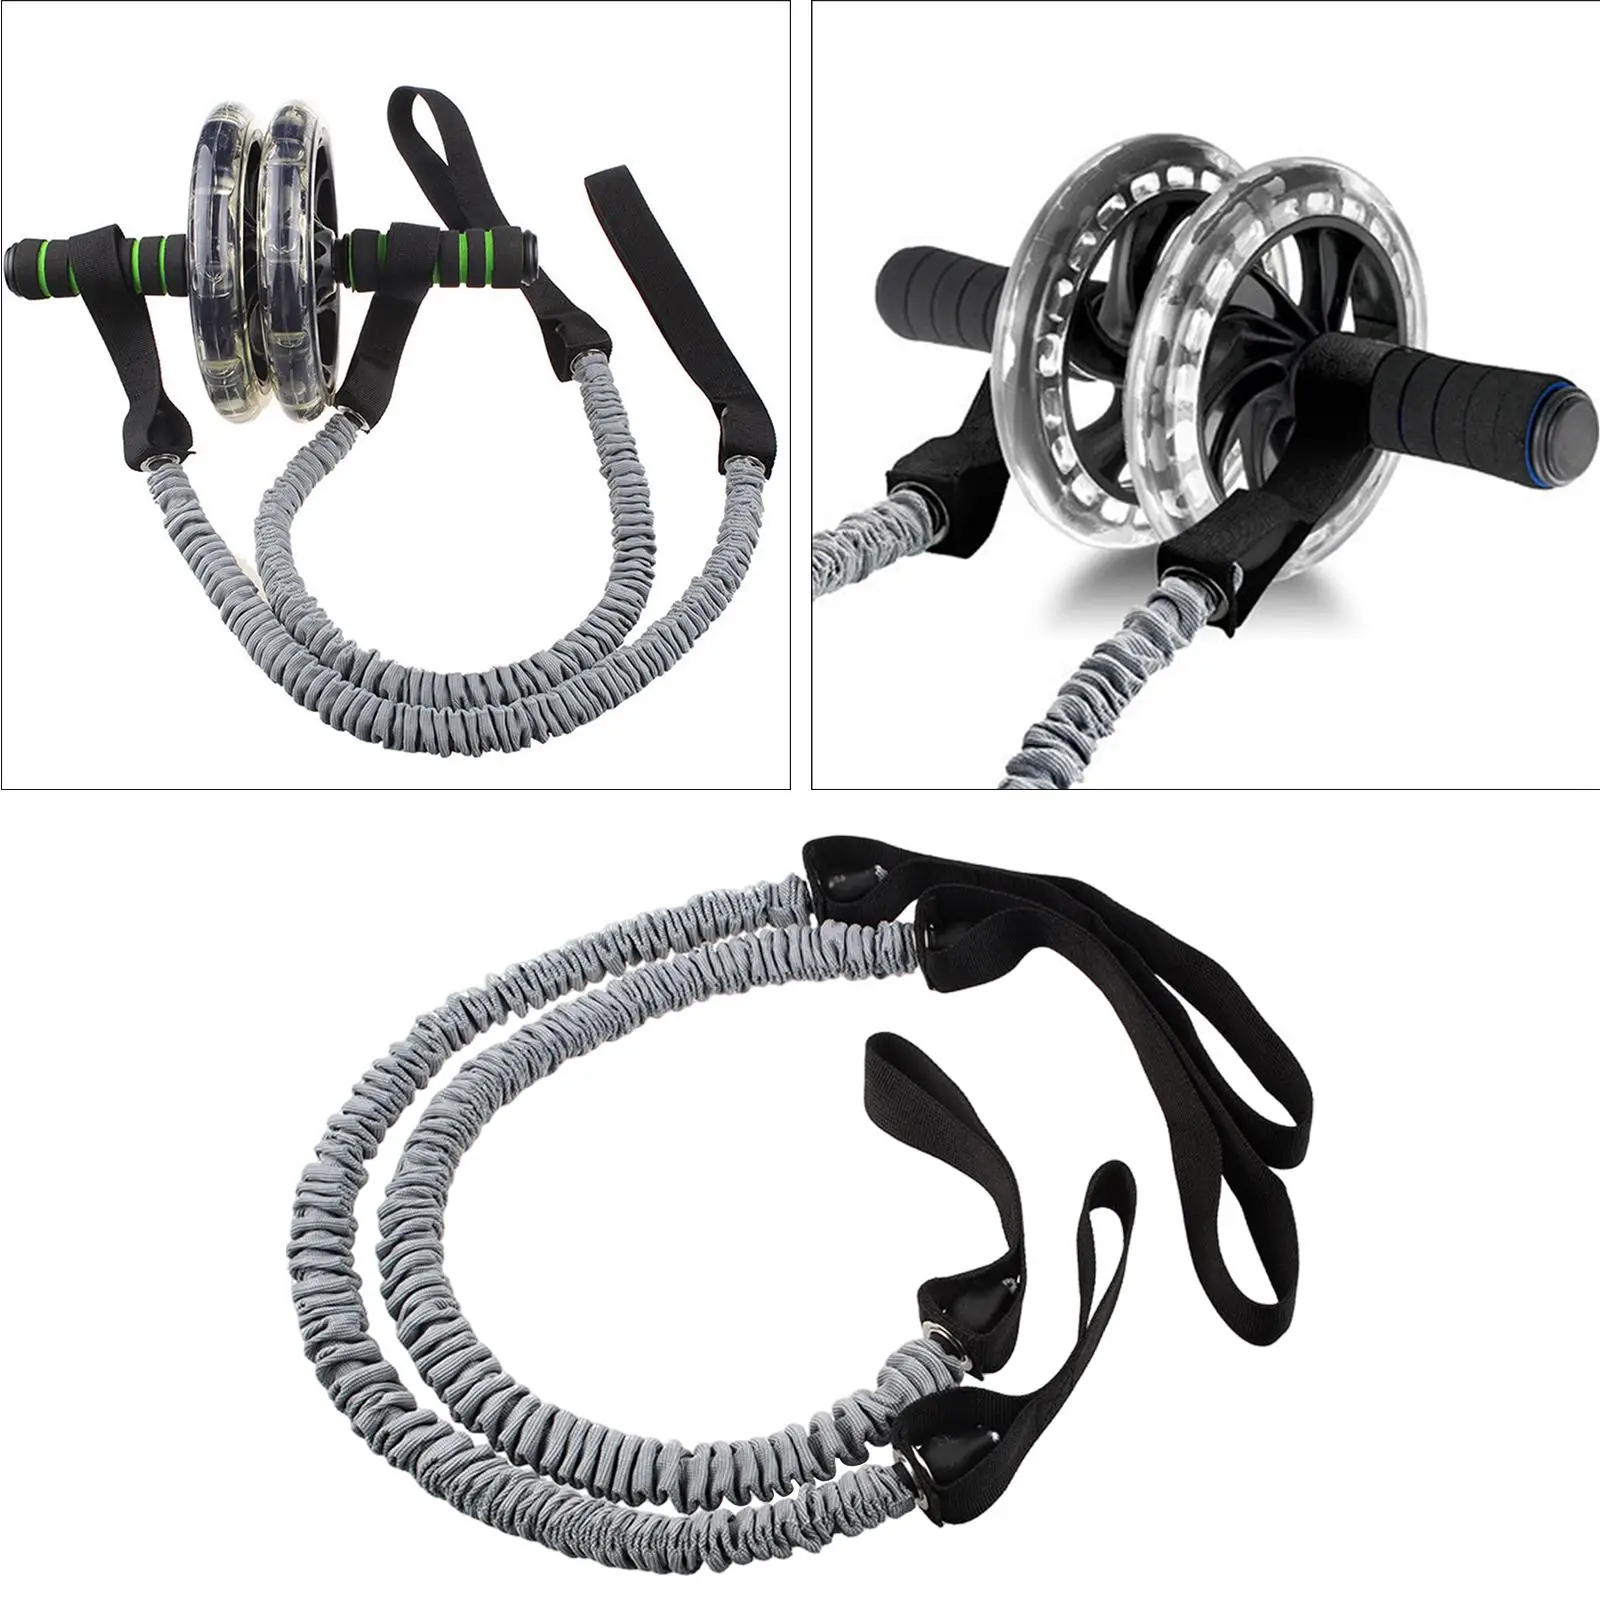 1 Pair Abdominal Roller Wheel Elastic Pull Rope Stretching Muscle Building Resistance Bands for Arms Back Legs Stretching